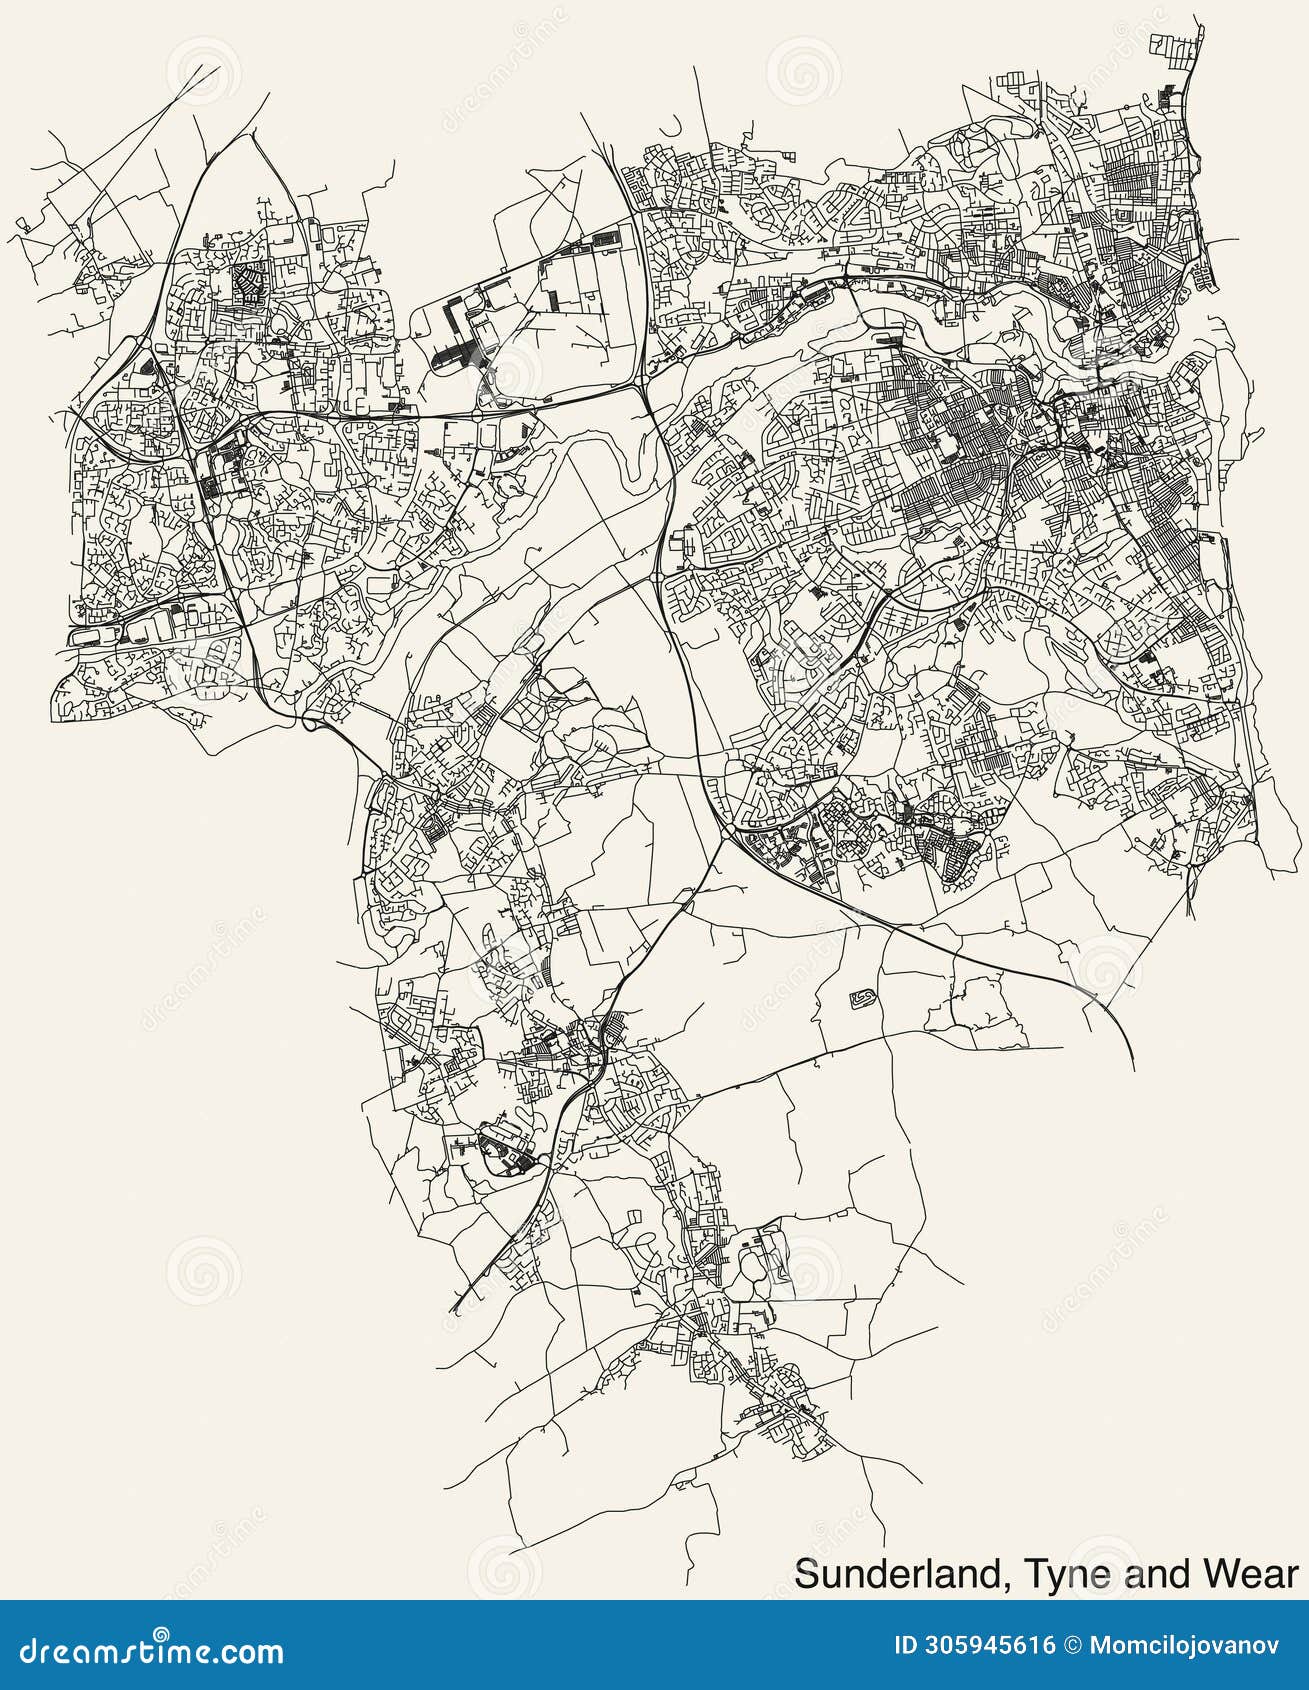 street roads map of the metropolitan borough and city of sunderland, tyne and wear